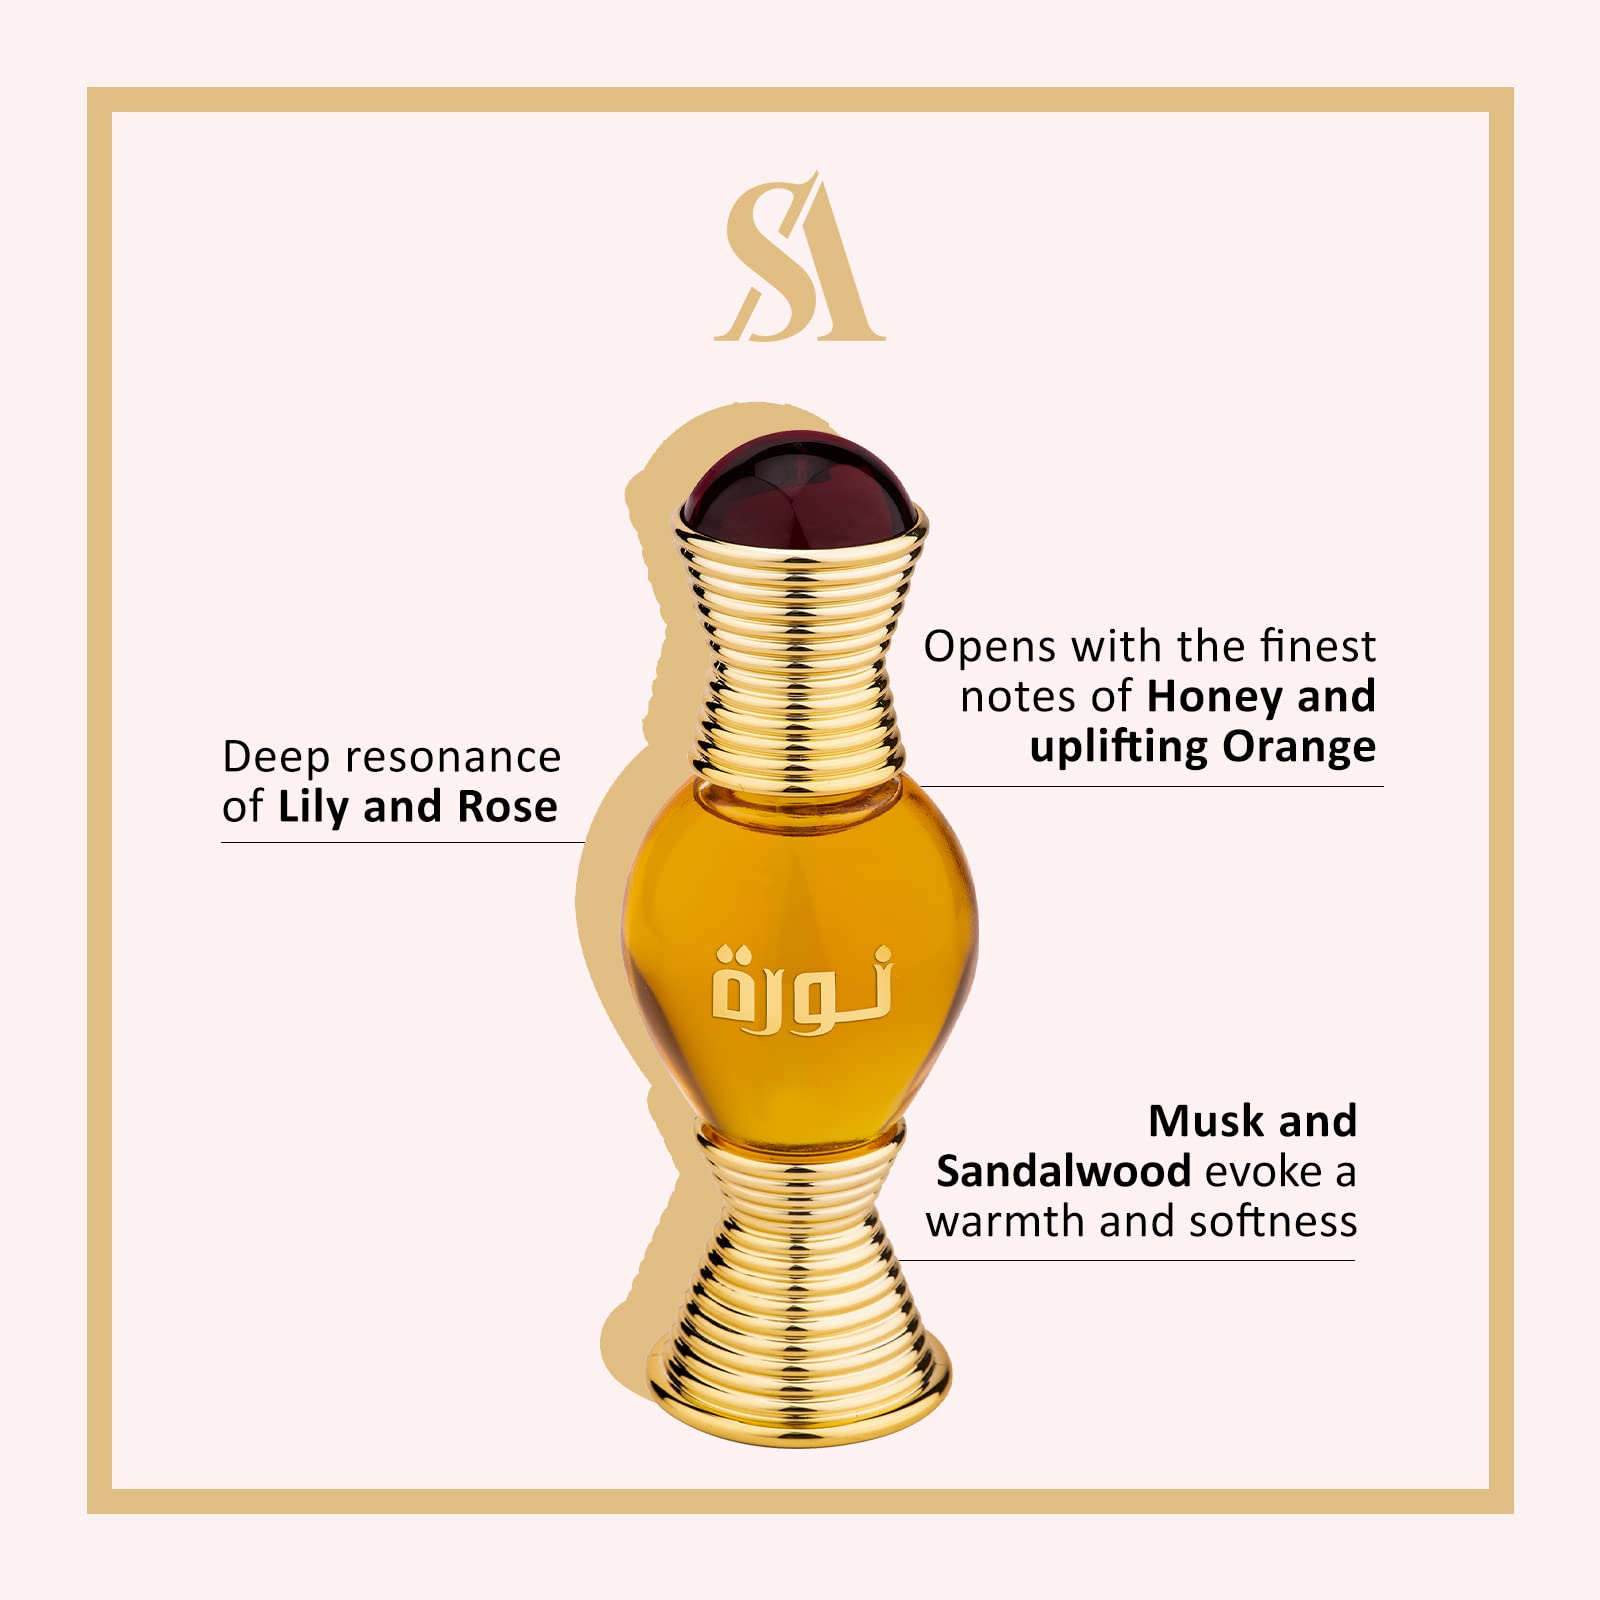 Swiss Arabian Noora - Luxury Products From Dubai - Long Lasting And Addictive Personal Perfume Oil Fragrance - A Seductive, High Quality Signature Aroma - The Luxurious Scent Of Arabia - 0.6 Oz